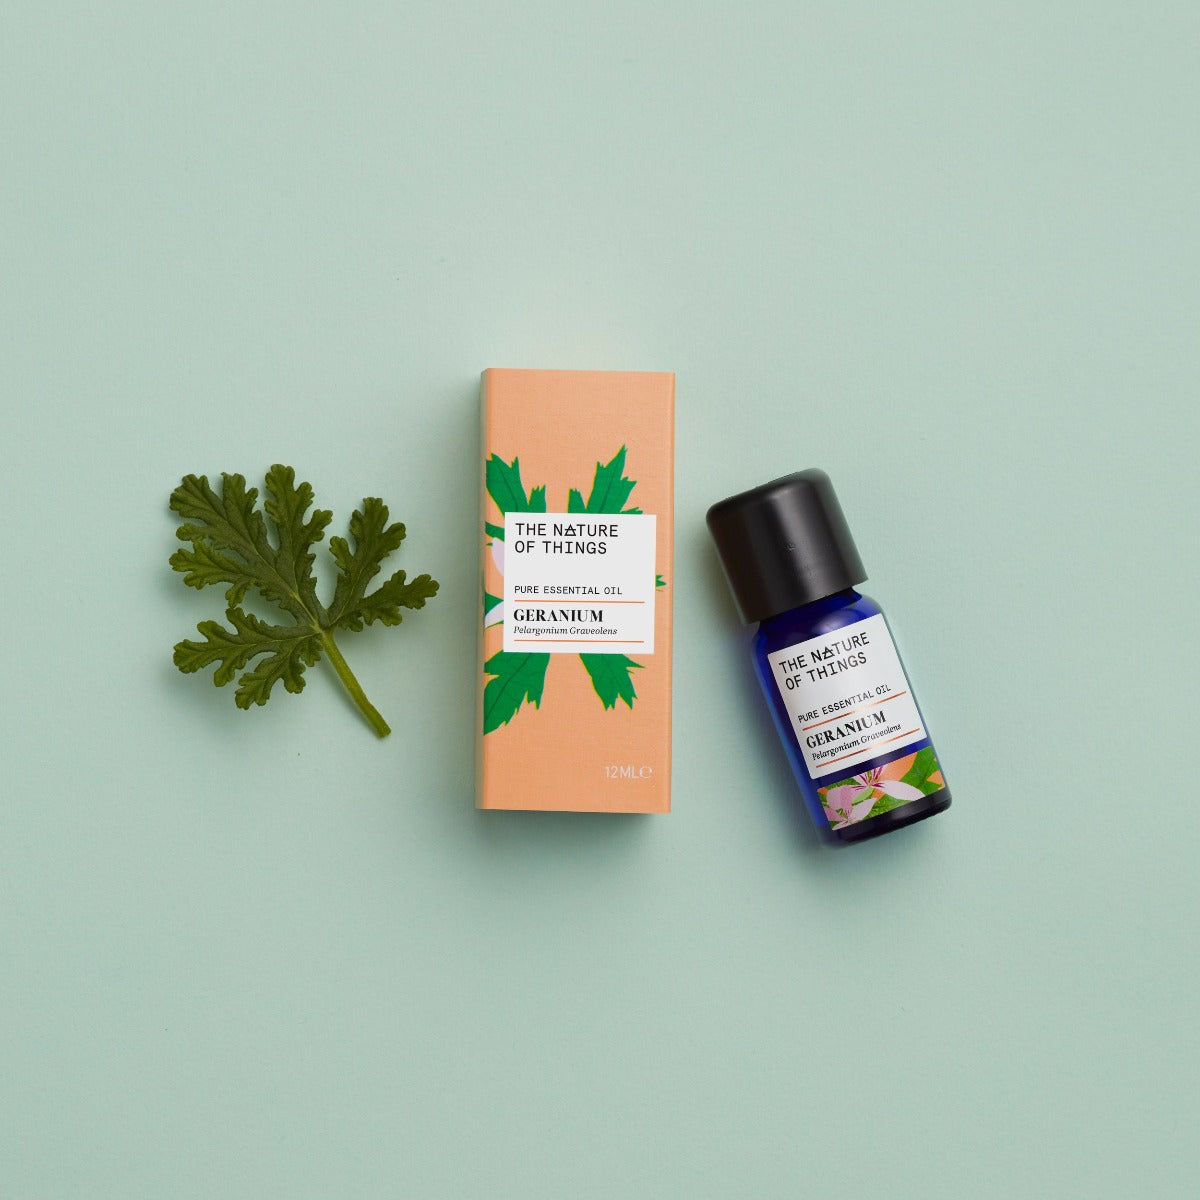 Organic Geranium Essential Oil from The Nature of Things